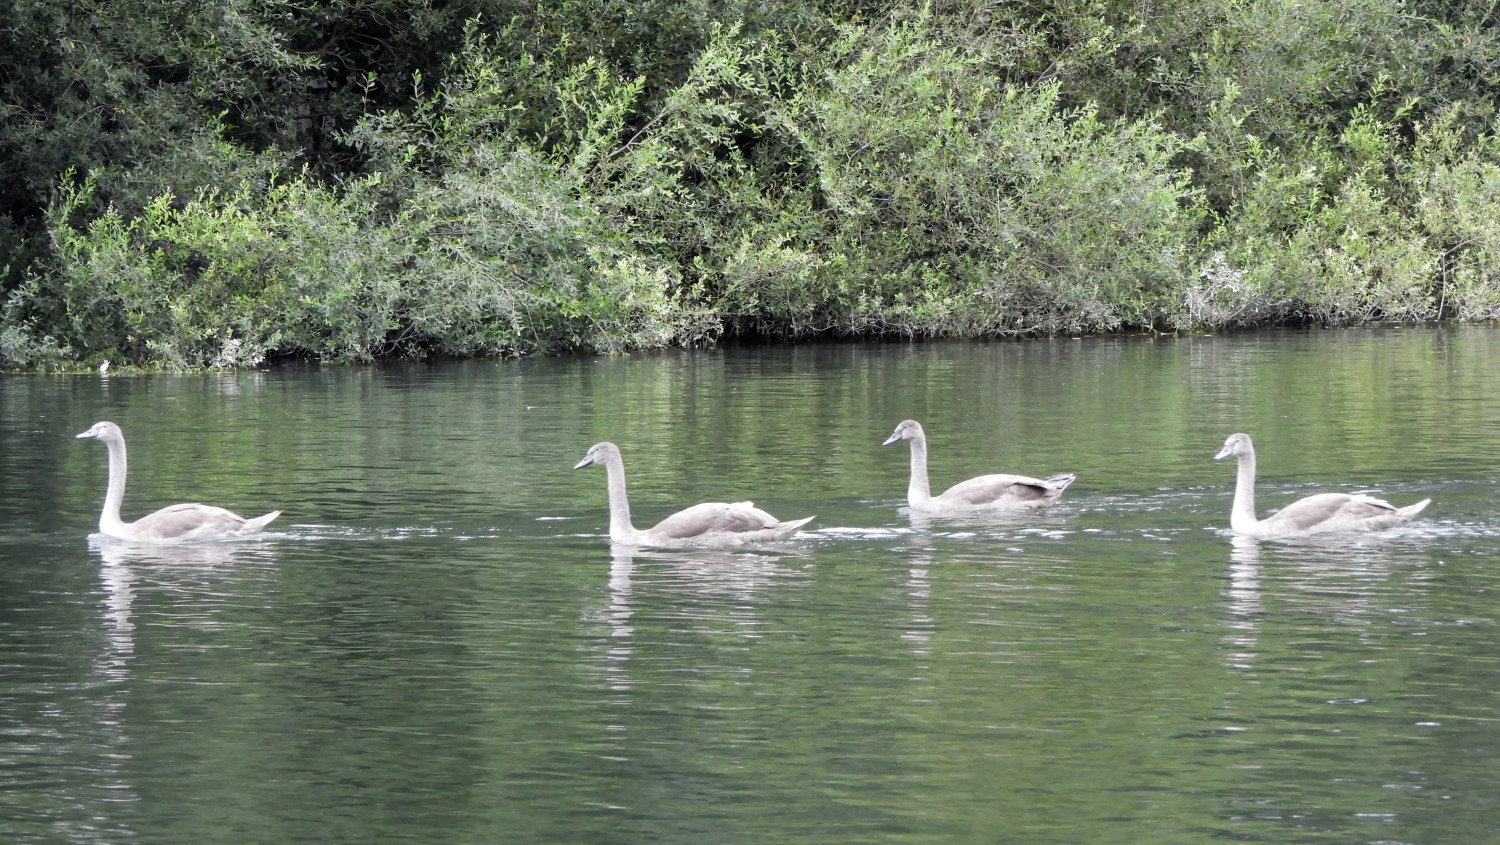 Orderly line of Cygnets cruising the Thames